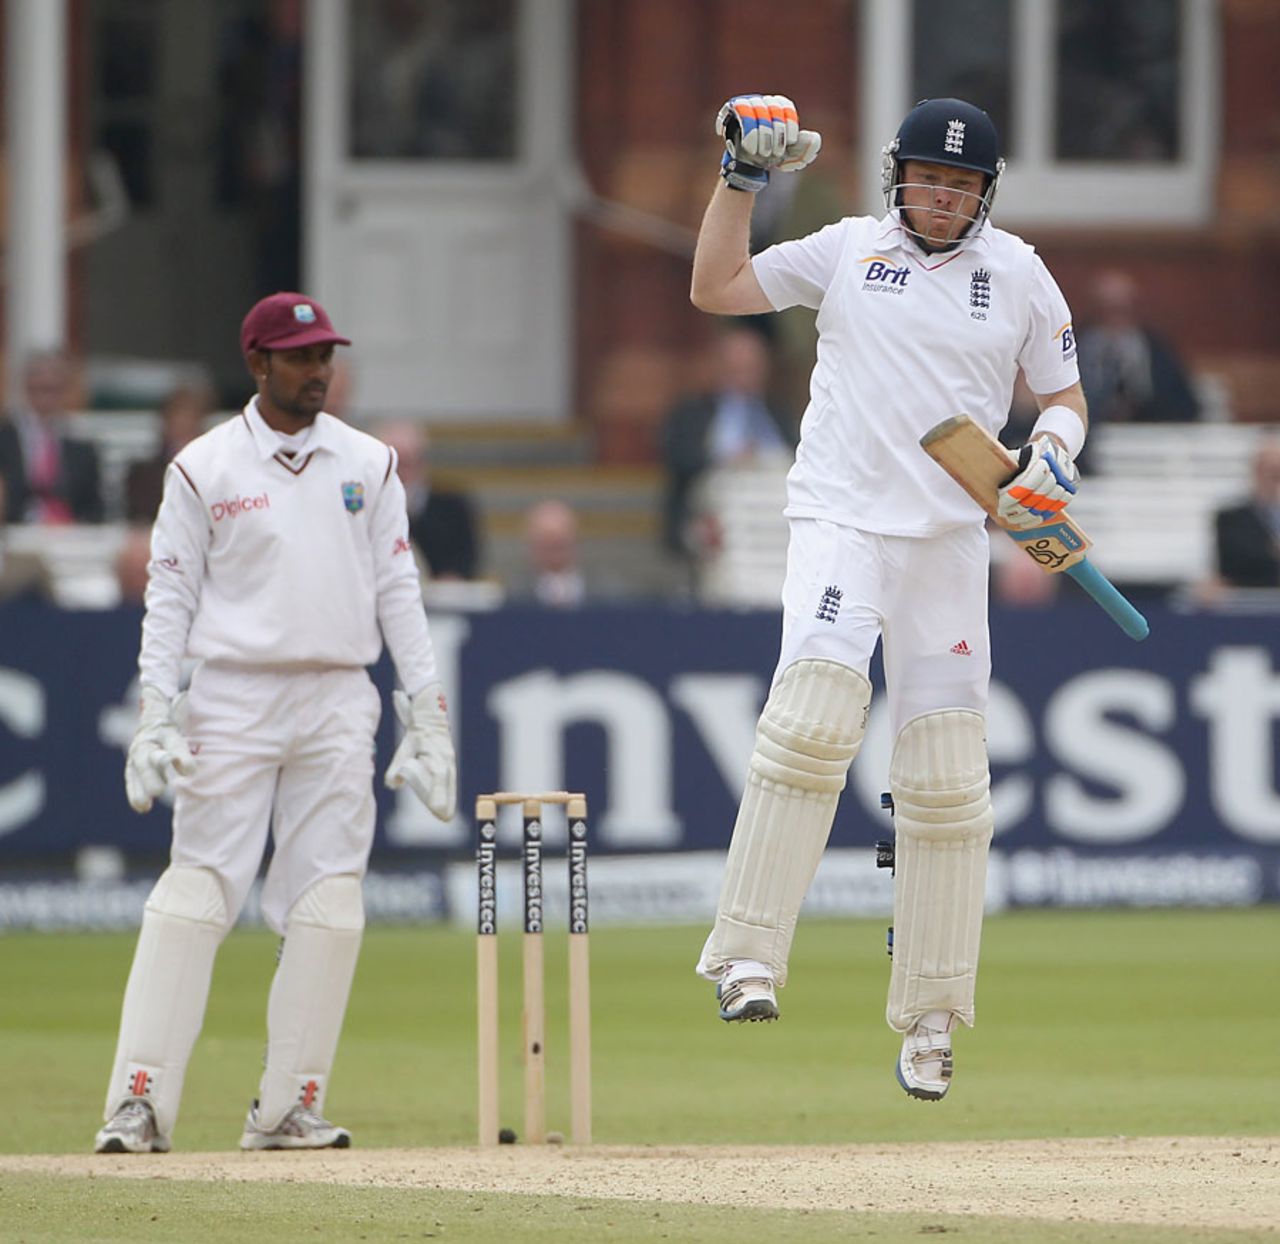 Ian Bell punches the air as England win by five wickets, England v West Indies, 1st Test, Lord's, 5th day, May 21, 2012